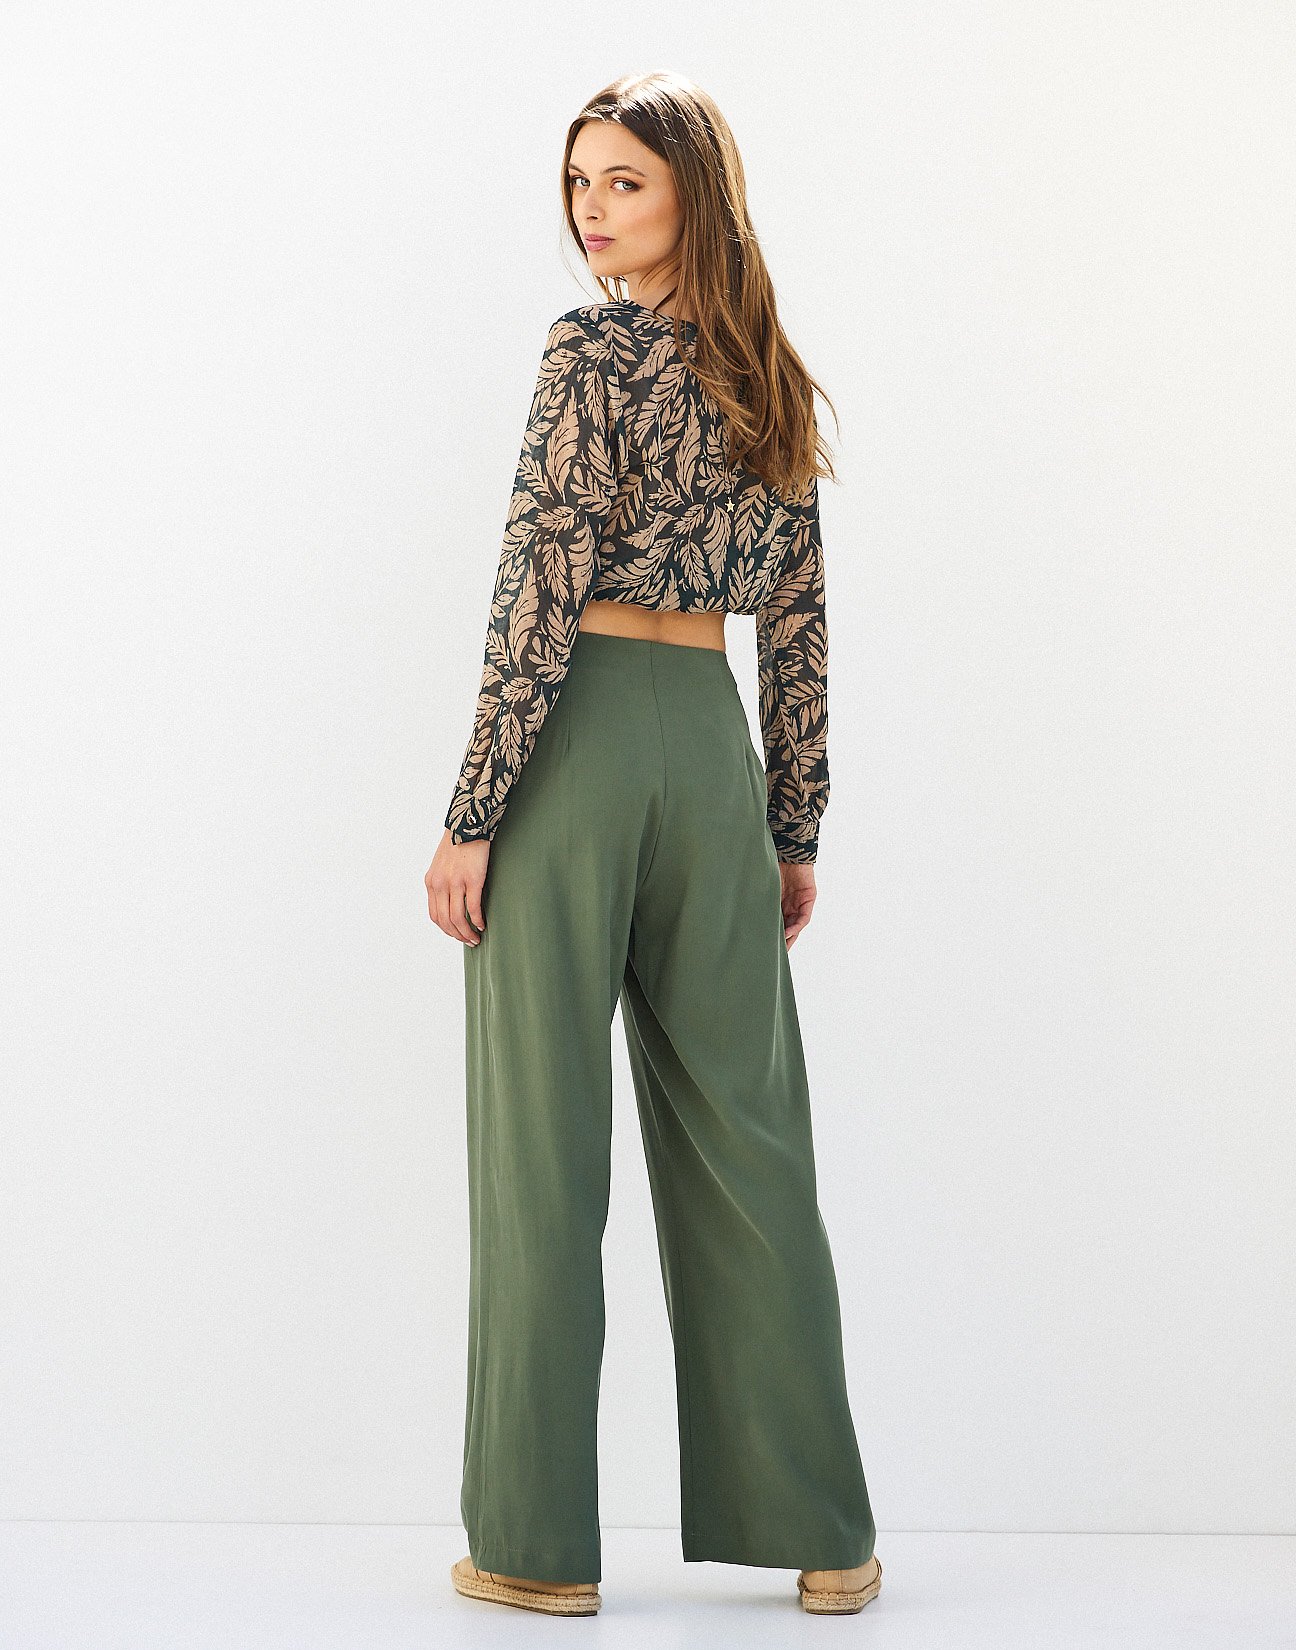 Gathered trousers